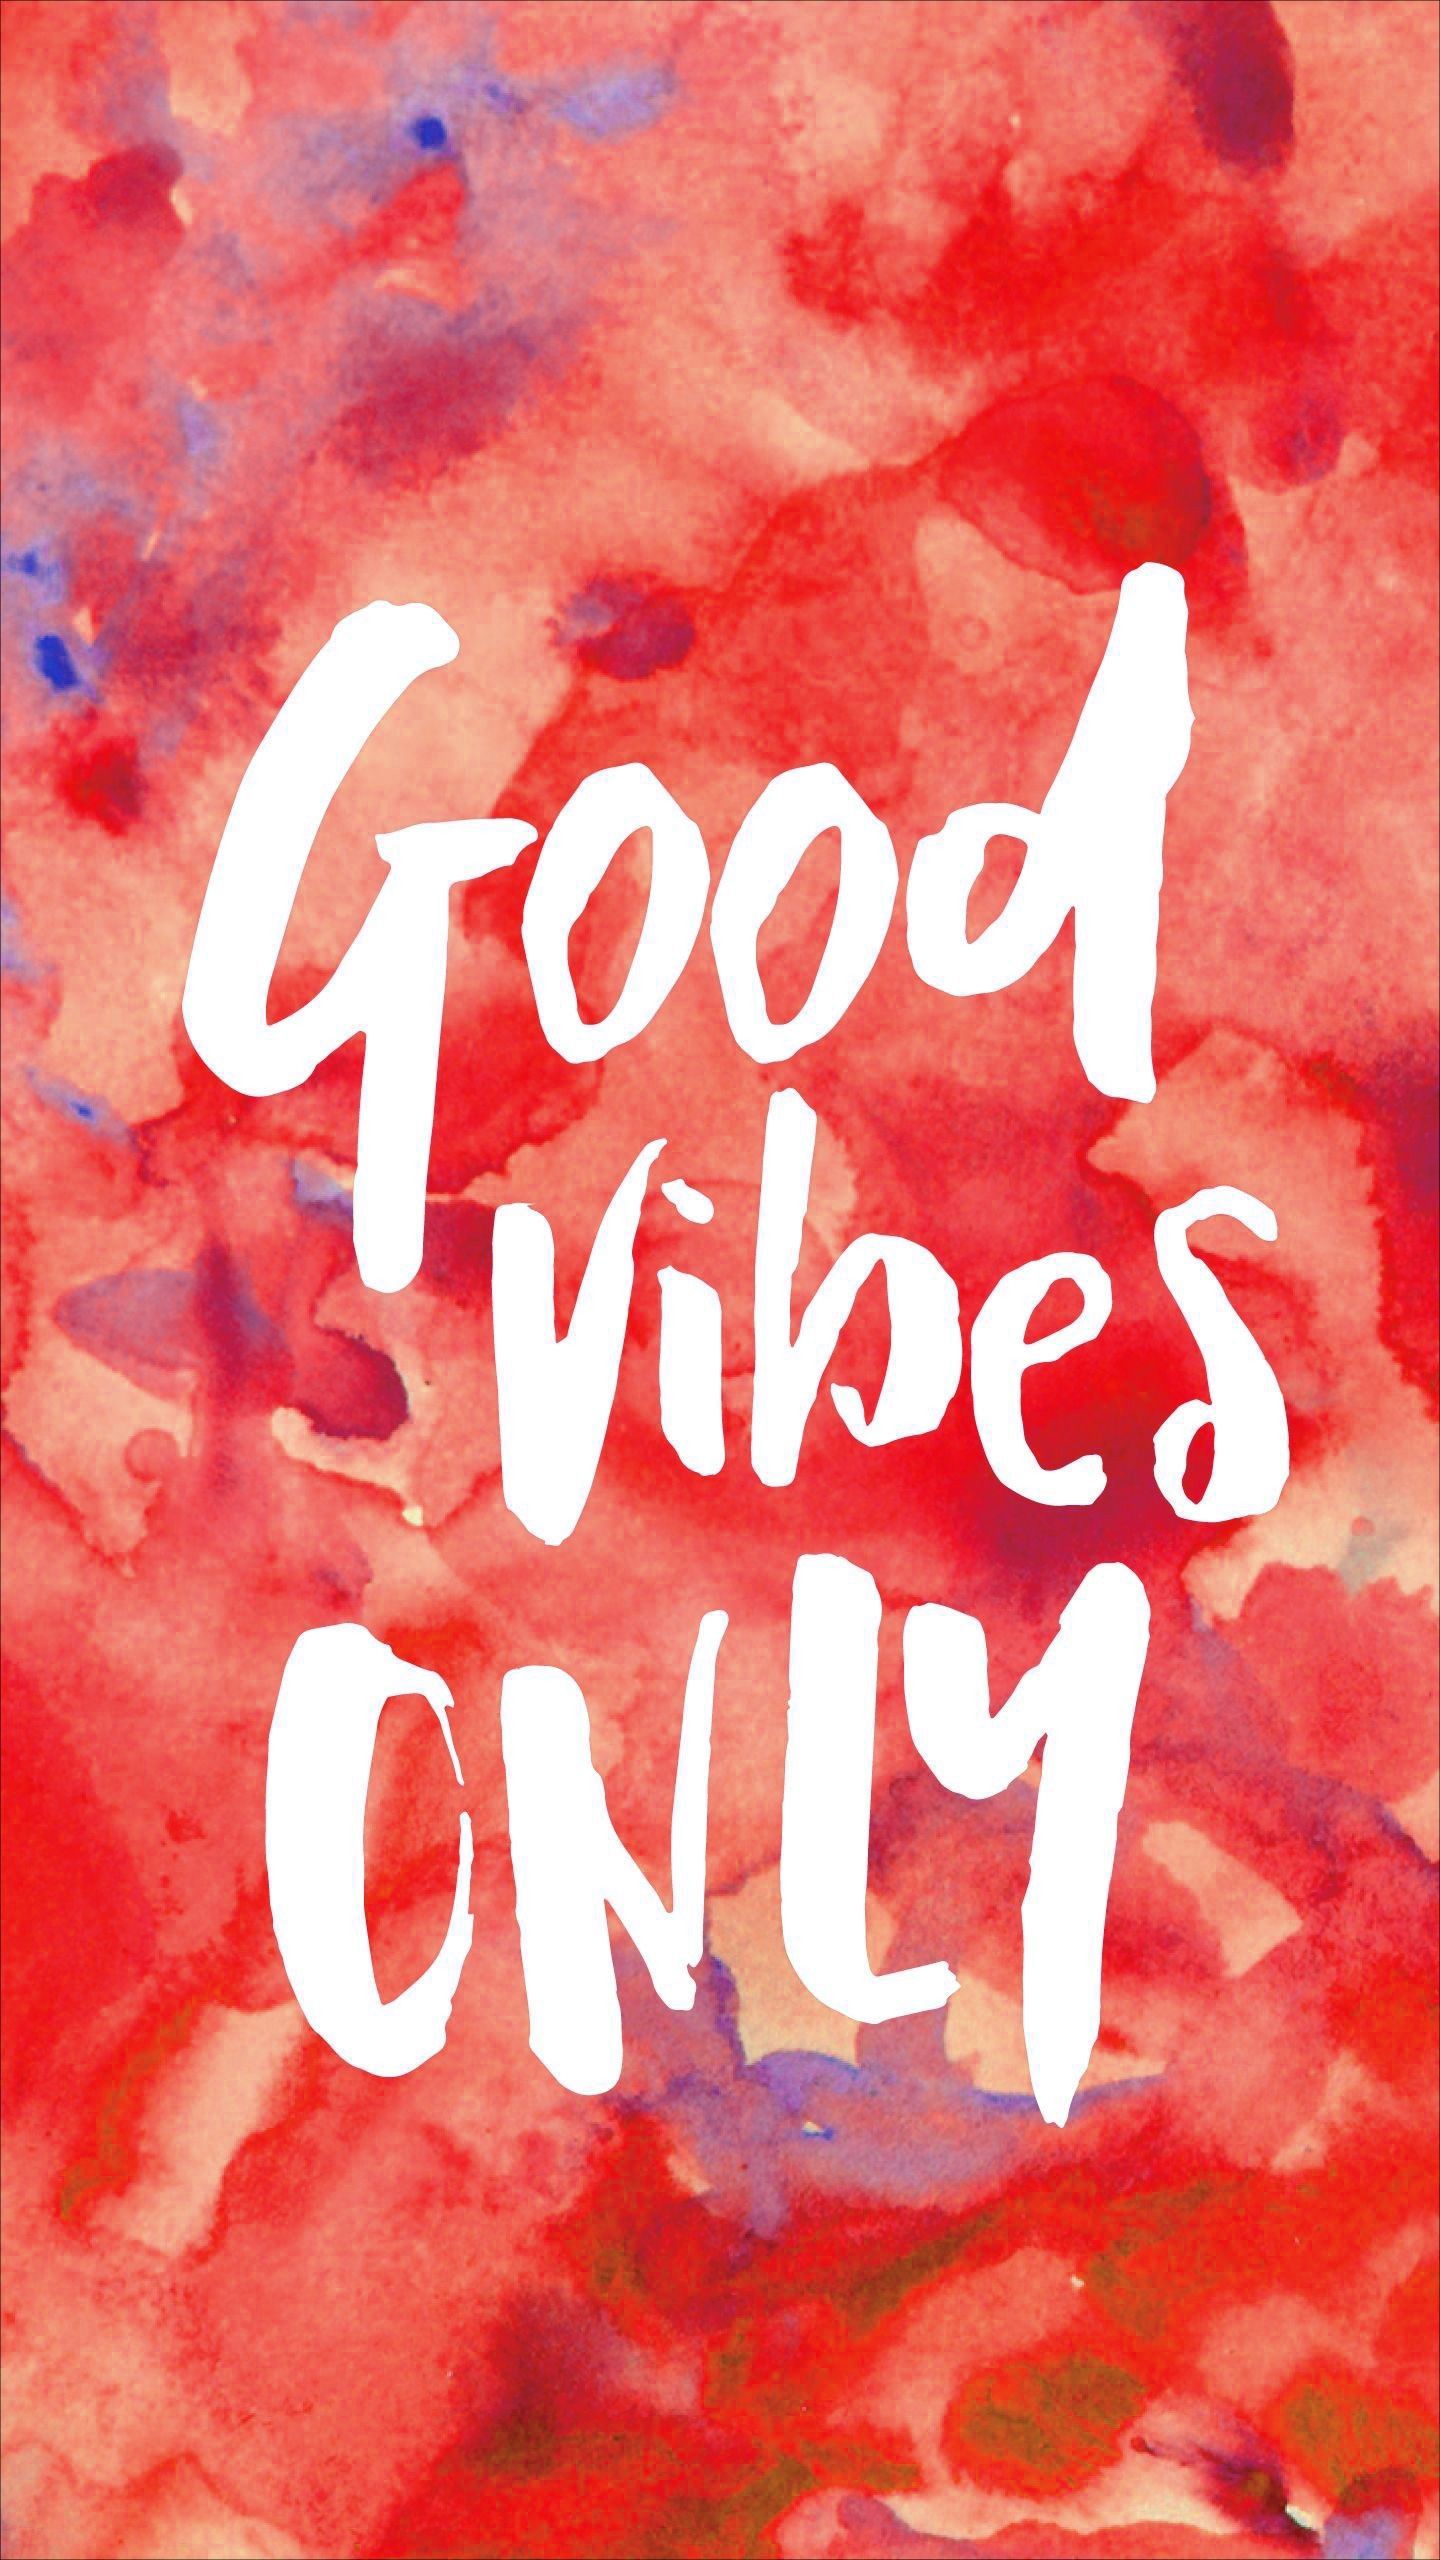 Good vibes only. - 